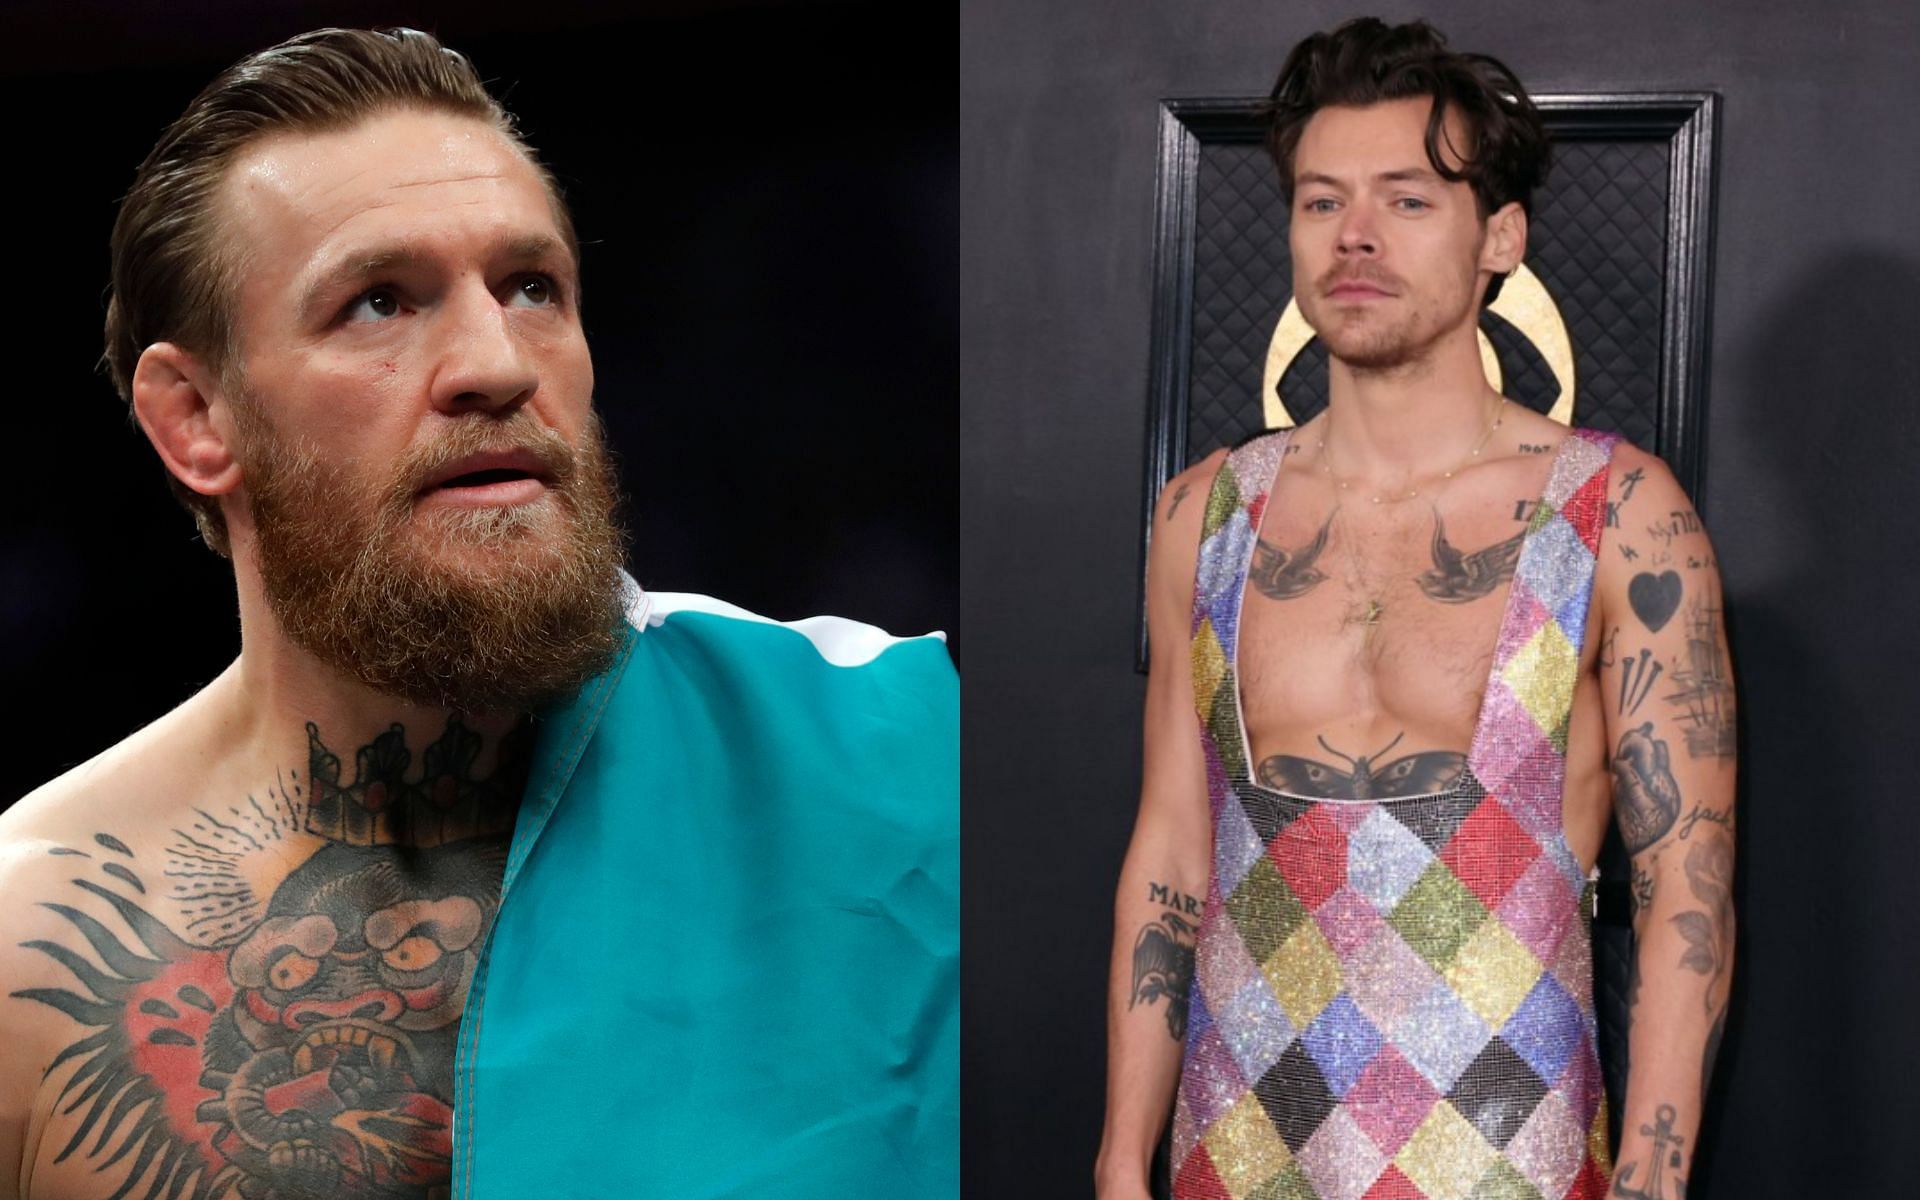 Conor McGregor (left), Harry Styles (right) [Image courtesy of @stillgray on Twitter]